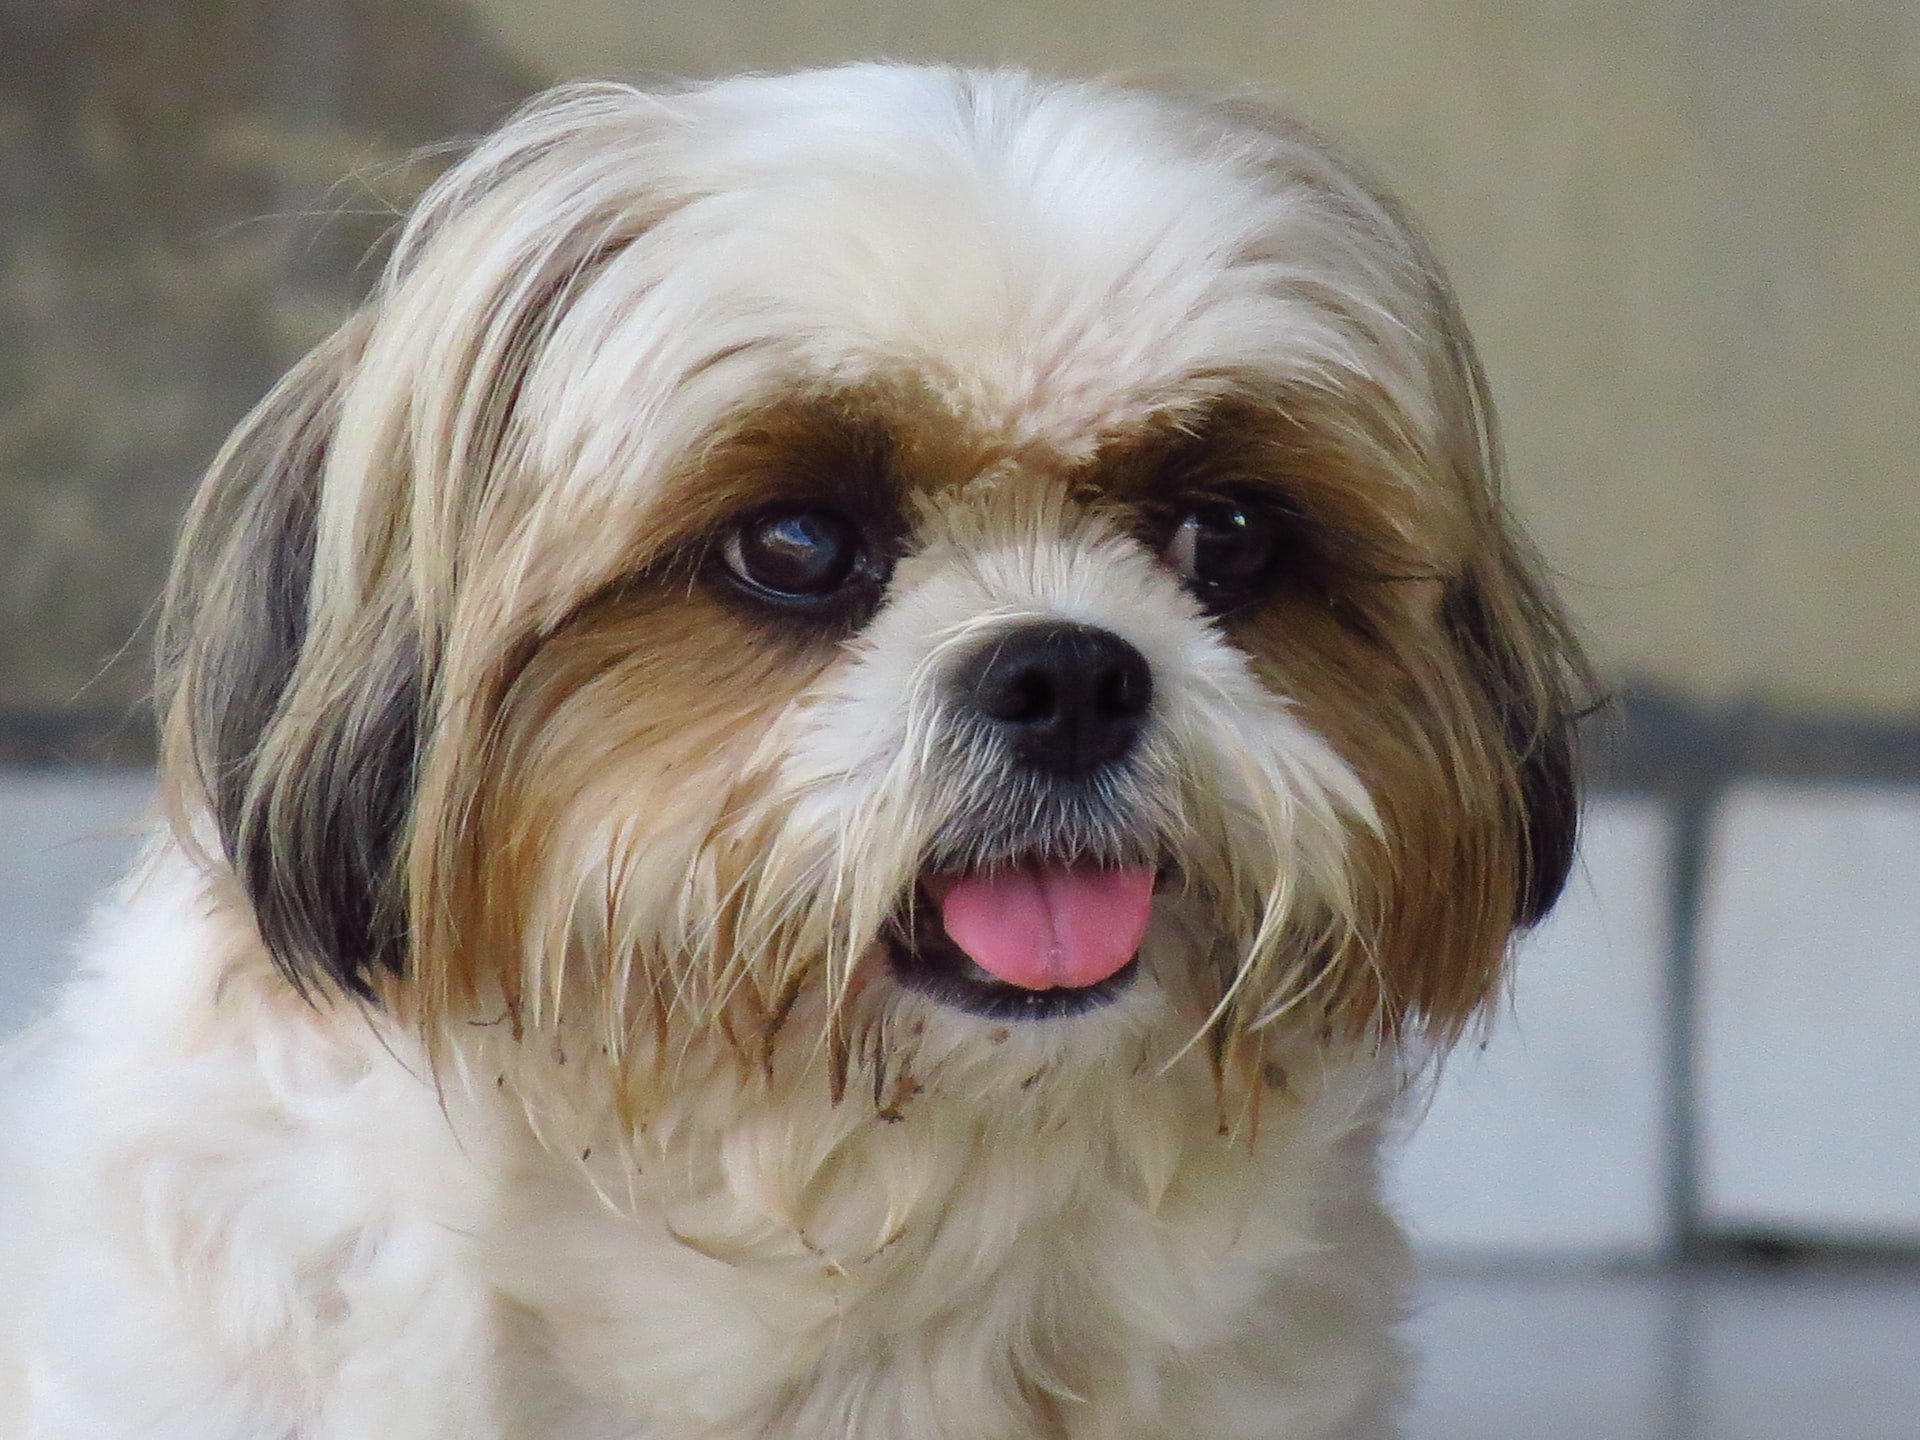 A white, brown and black colored Shih Tzu looking away from the camera with their tongue sticking out. Image by Dieny Portinanni from Unsplash.